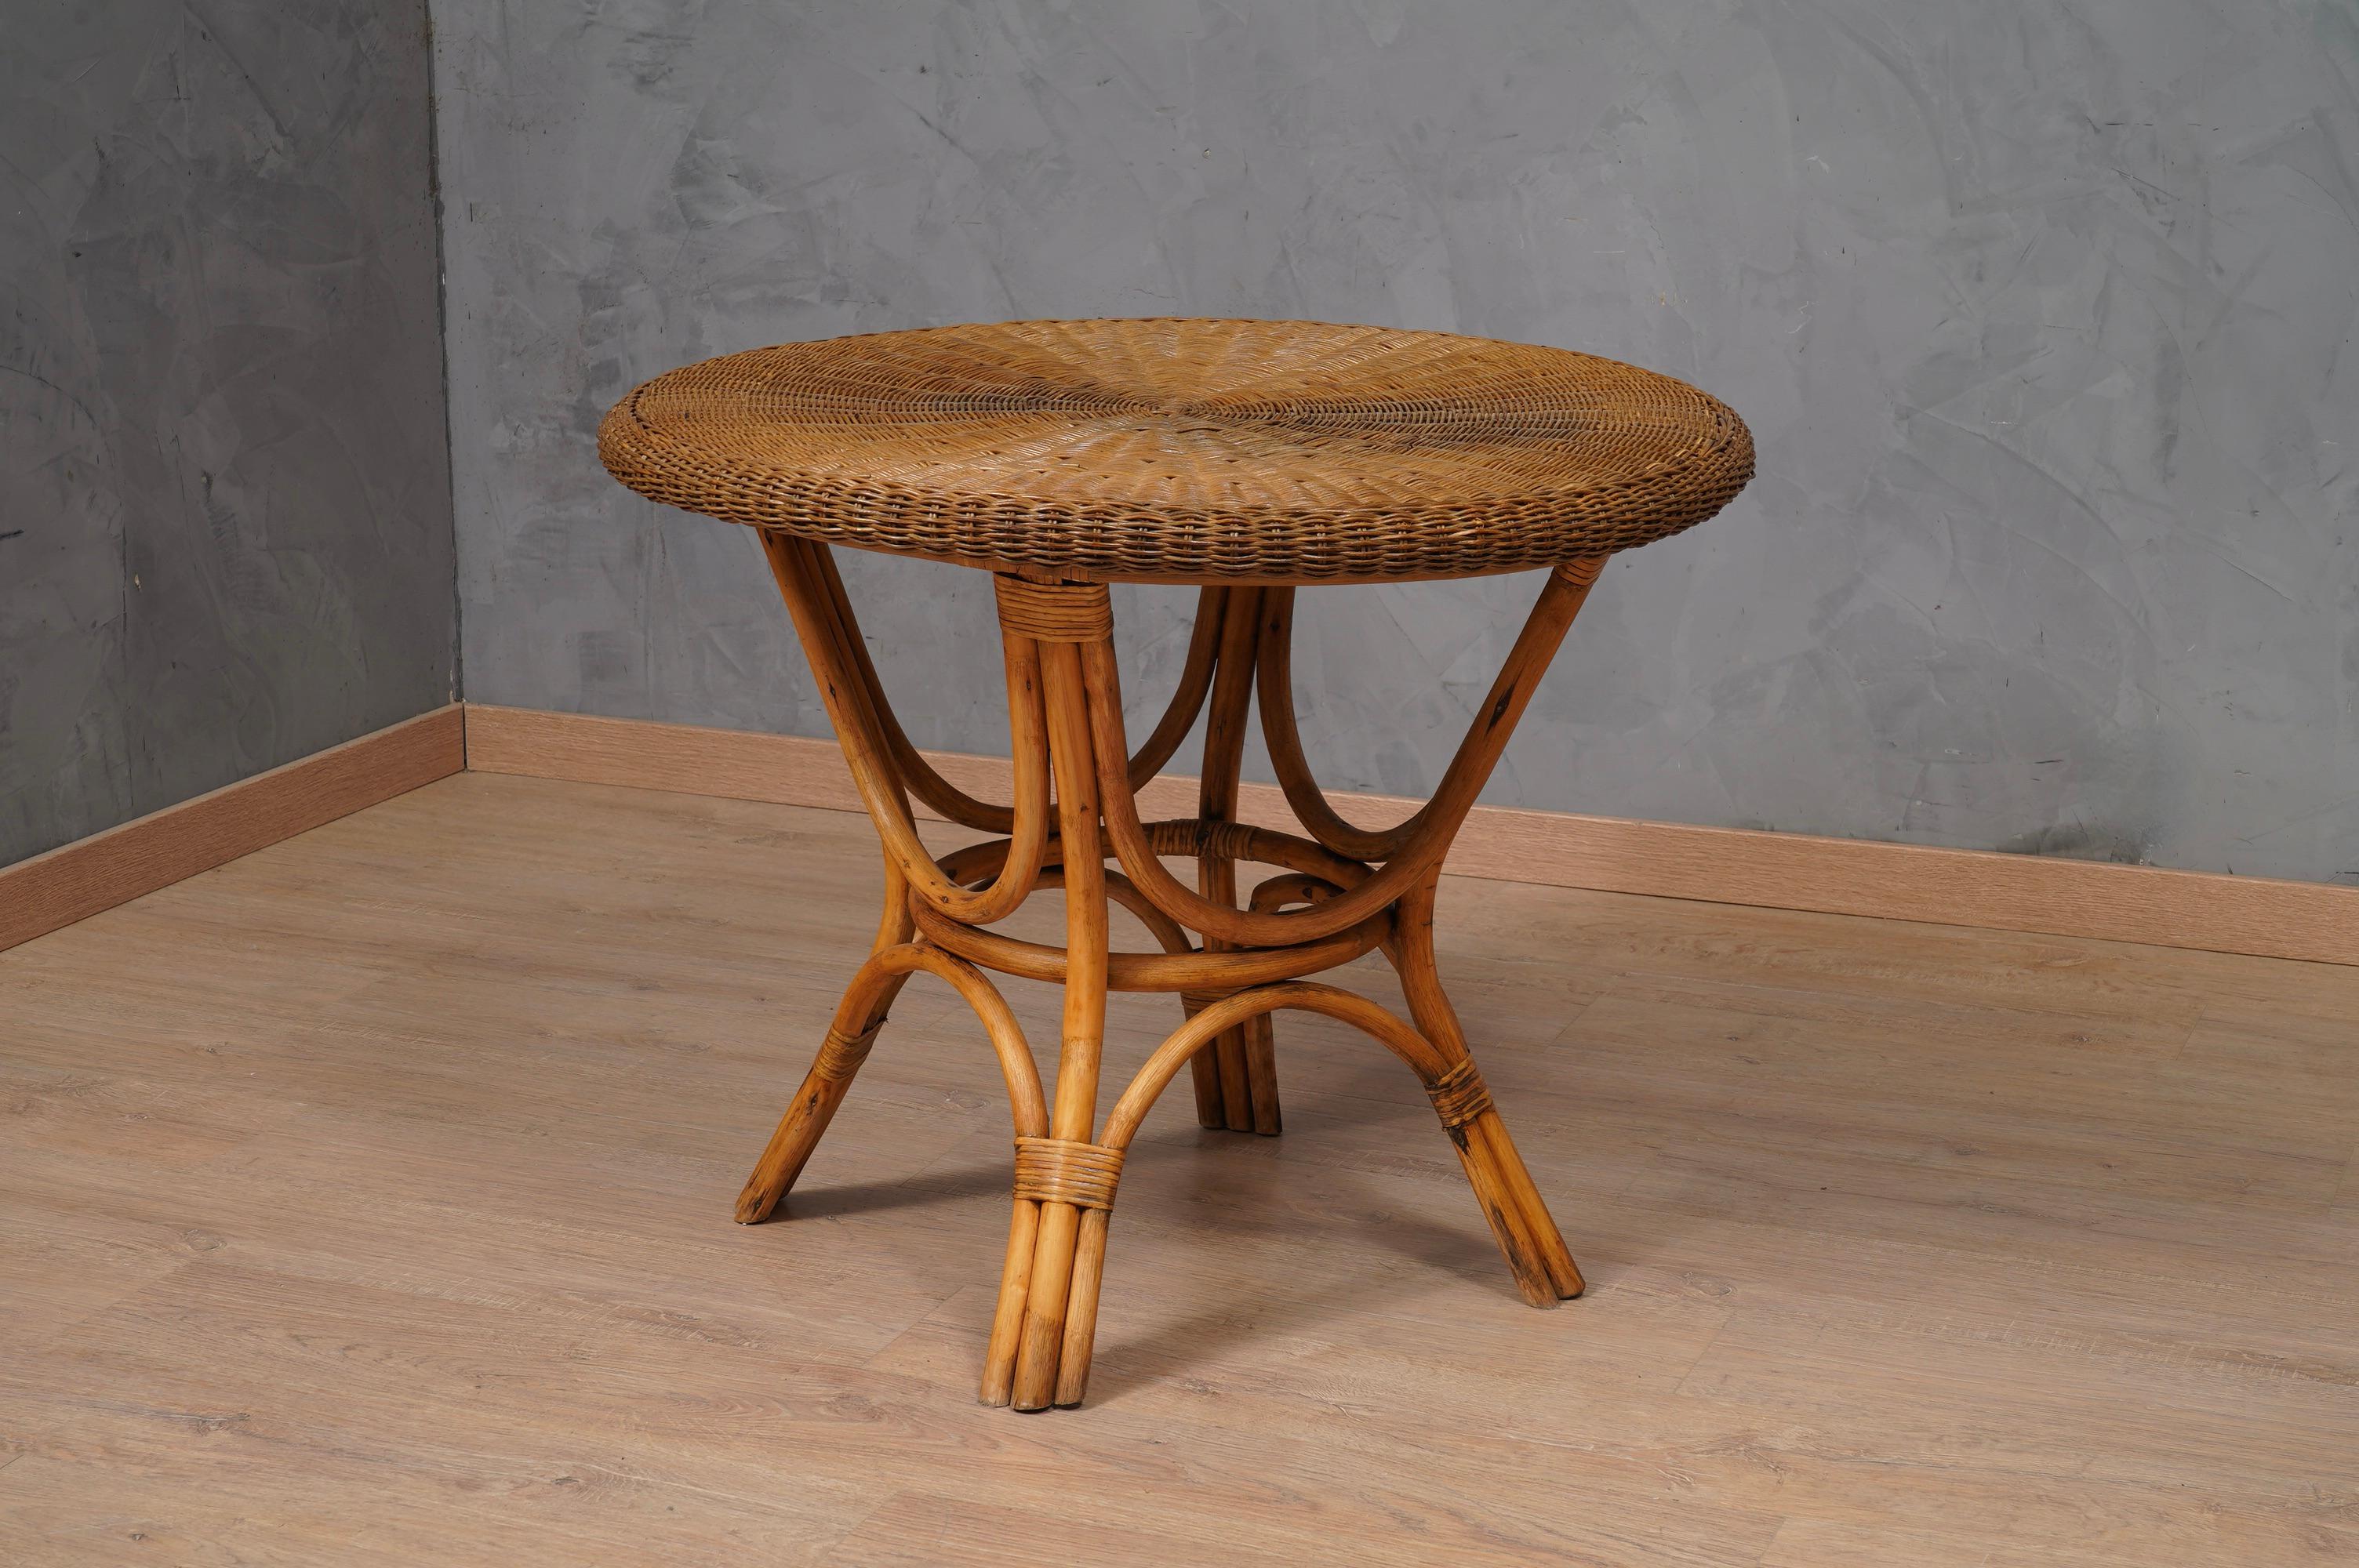 Fantastic rattan side table by Gio Ponti; Very comfortable and in good state of use.

Woven by hand, the tea table is made up of two overlapping surfaces; they have a circular shape and the internal wicker on the top is made in the shape of a